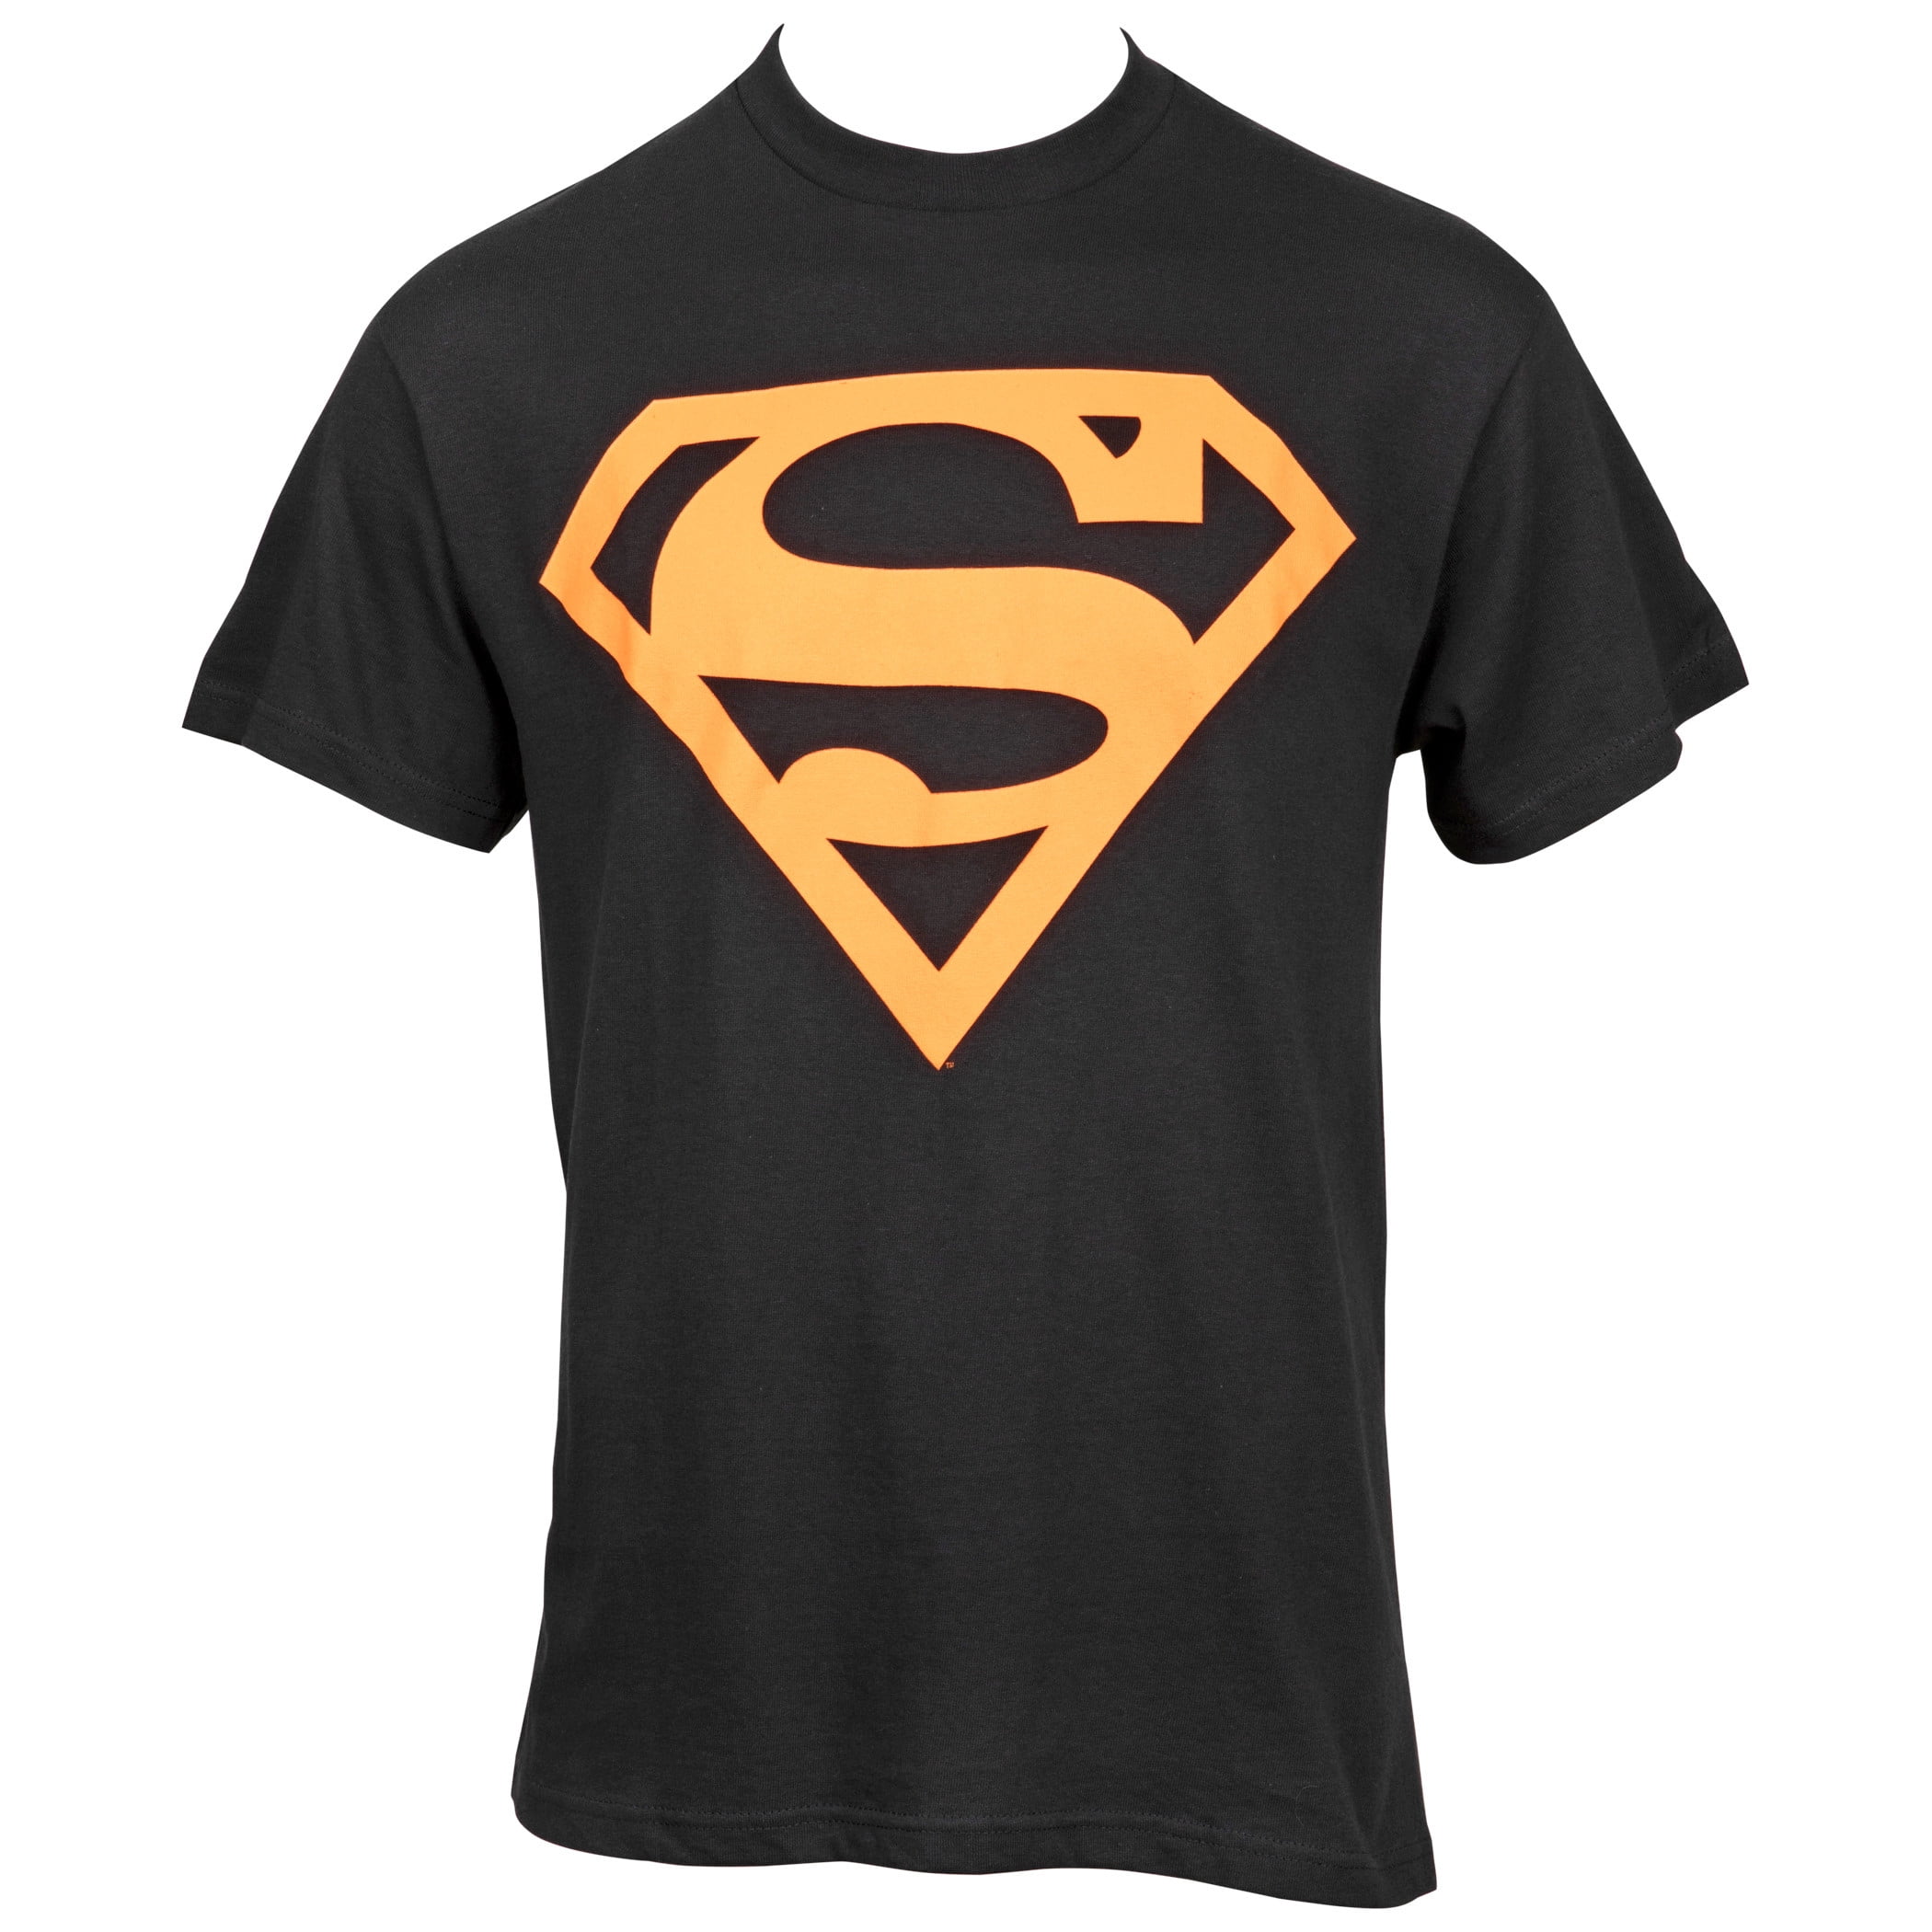 LOGO T-Shirt S-XXL Officially Licensed SUPERMAN 